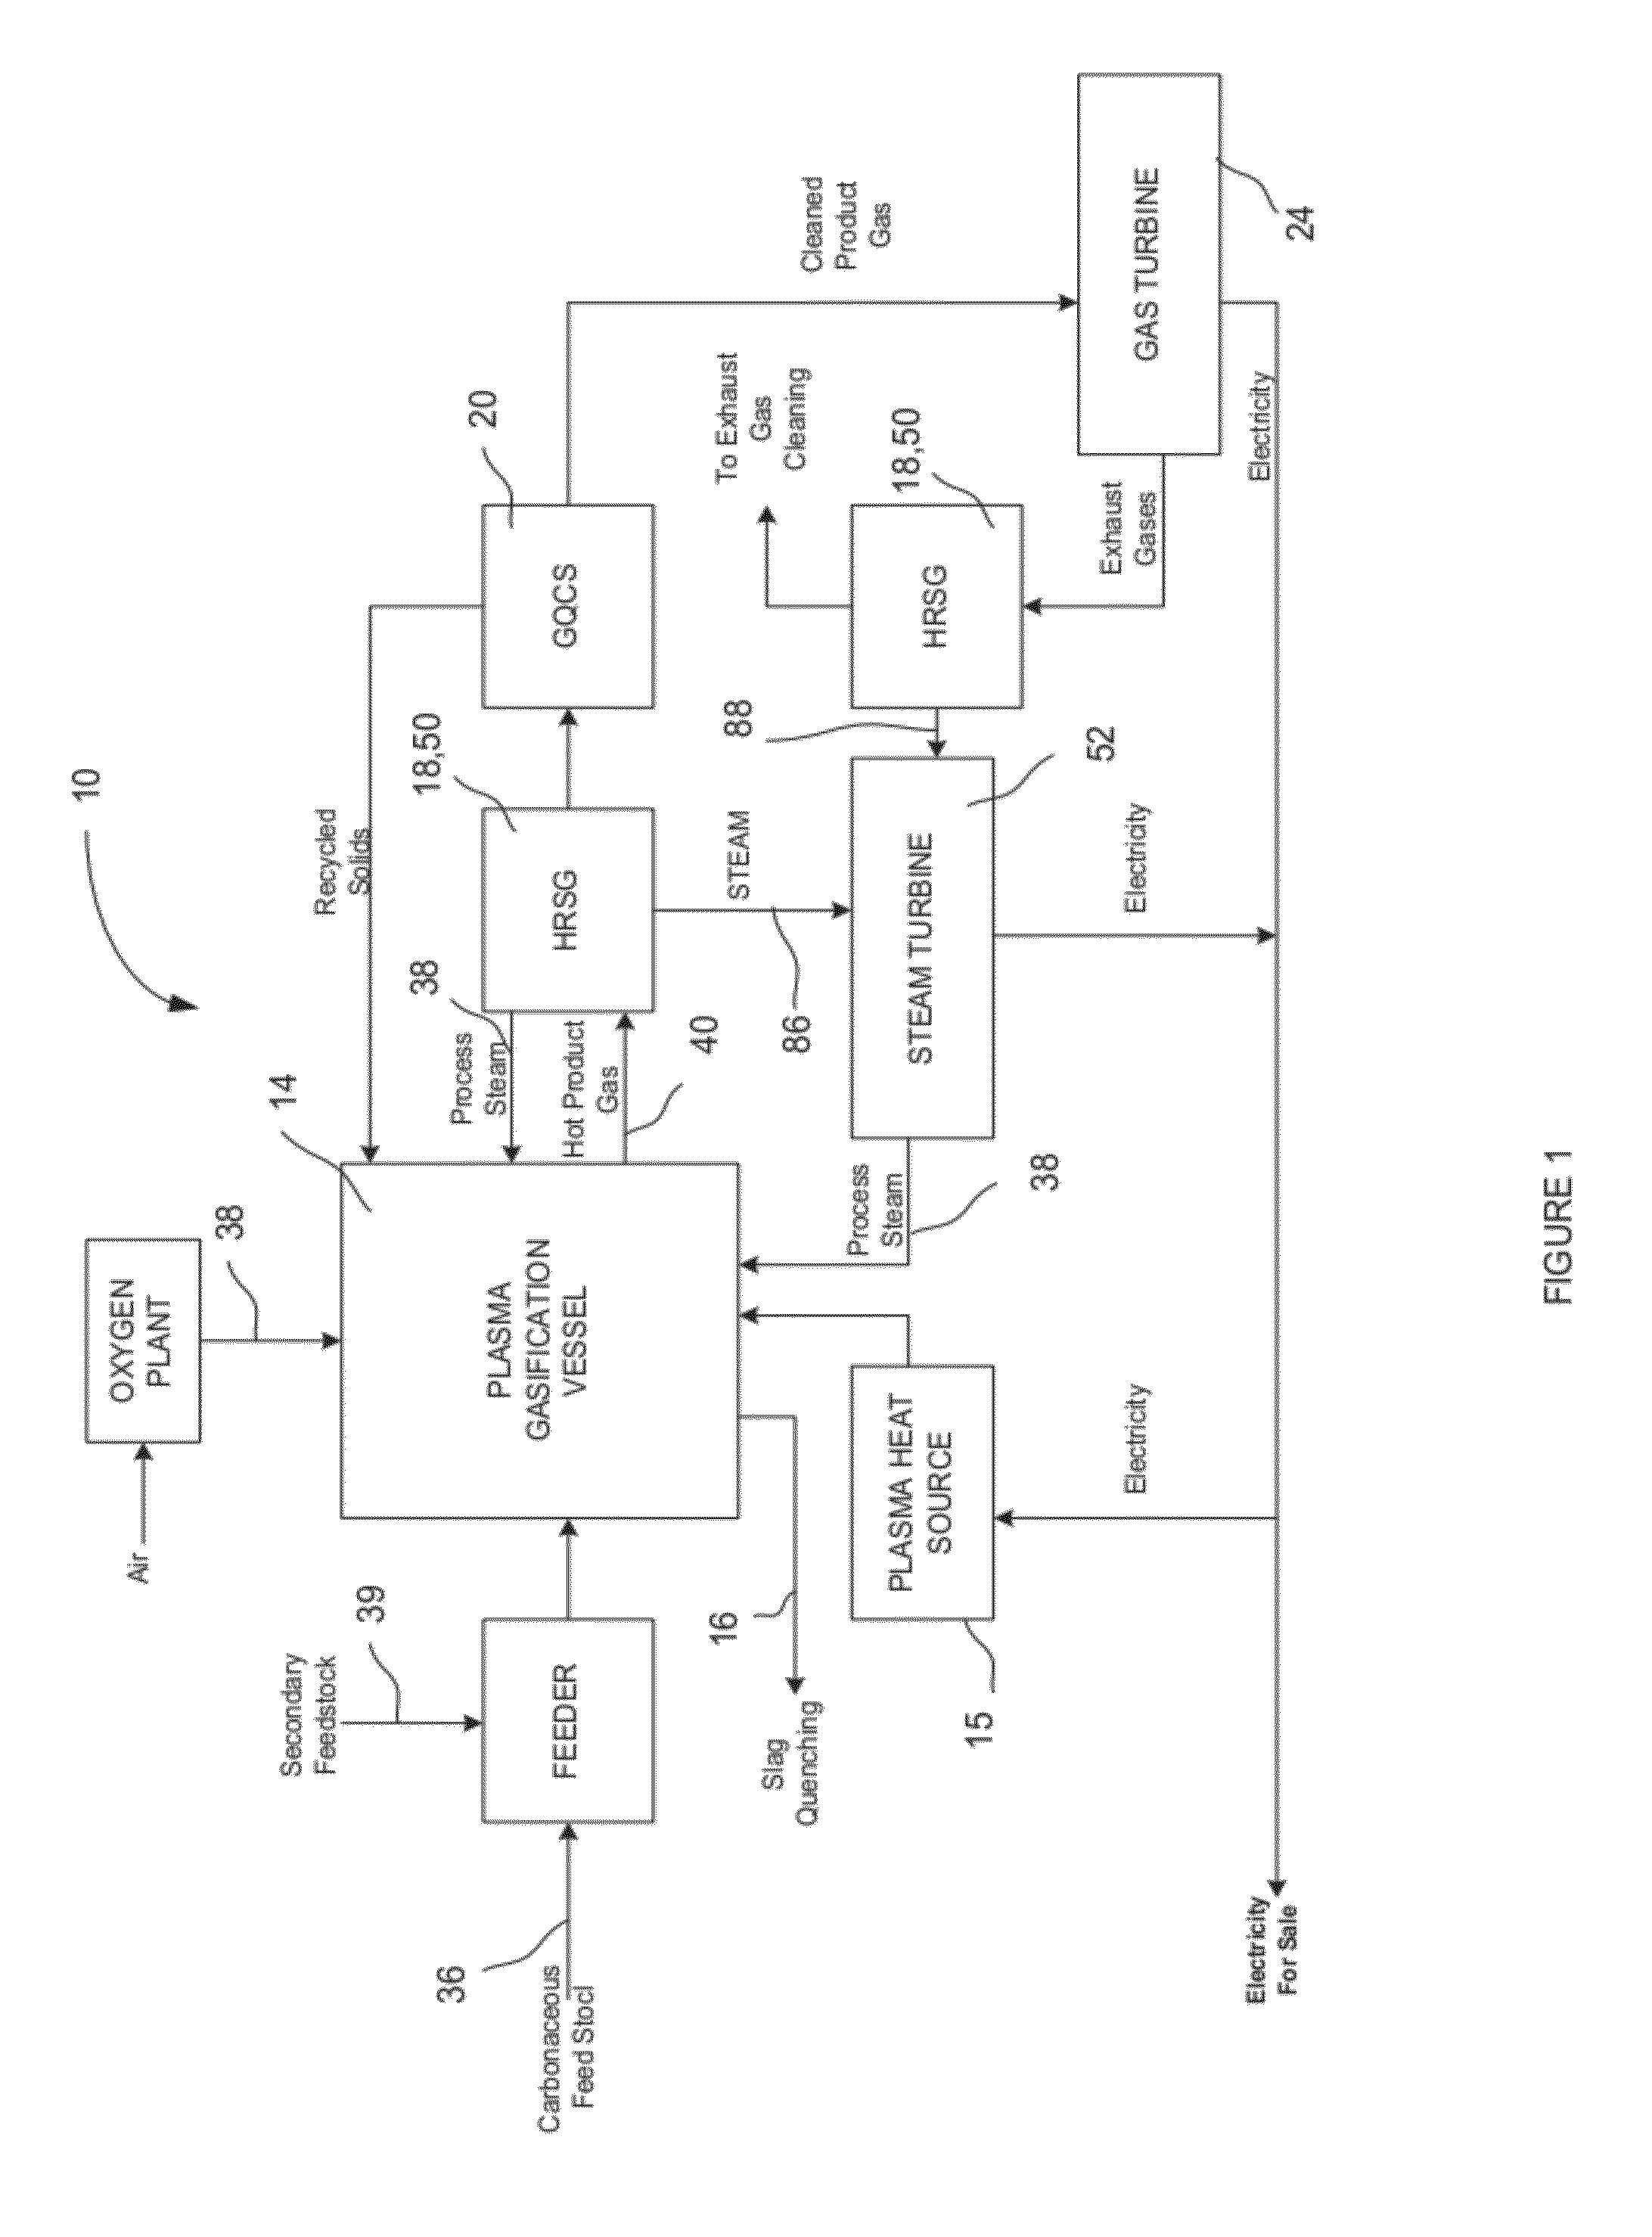 System For The Conversion Of Carbonaceous Feedstocks To A Gas Of A Specified Composition